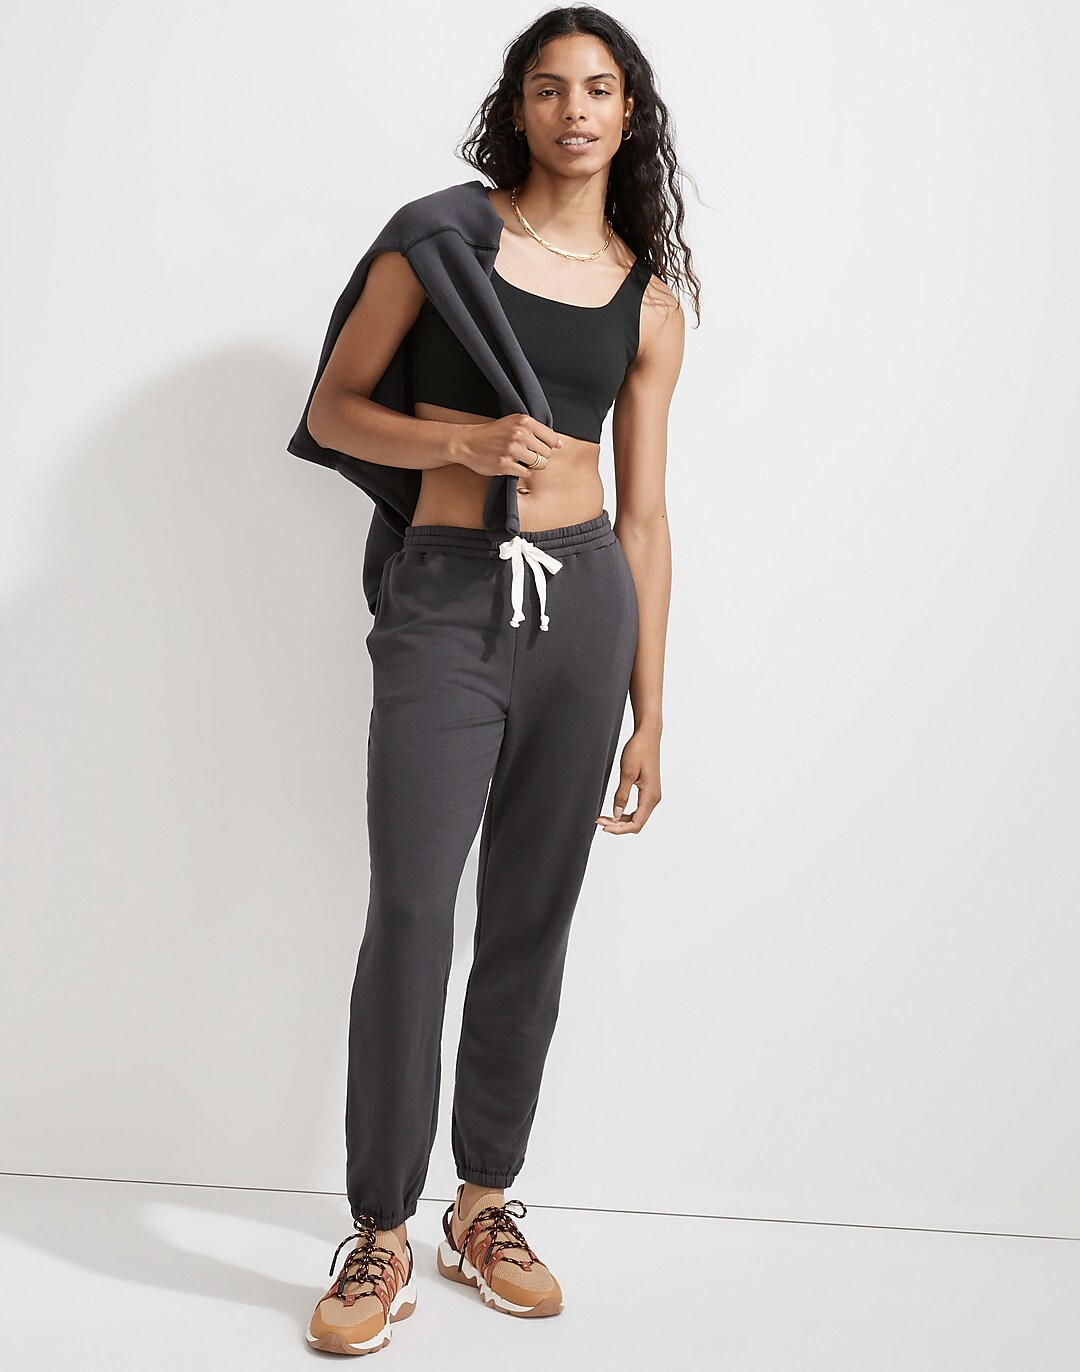 Petite Superbrushed Easygoing Sweatpants